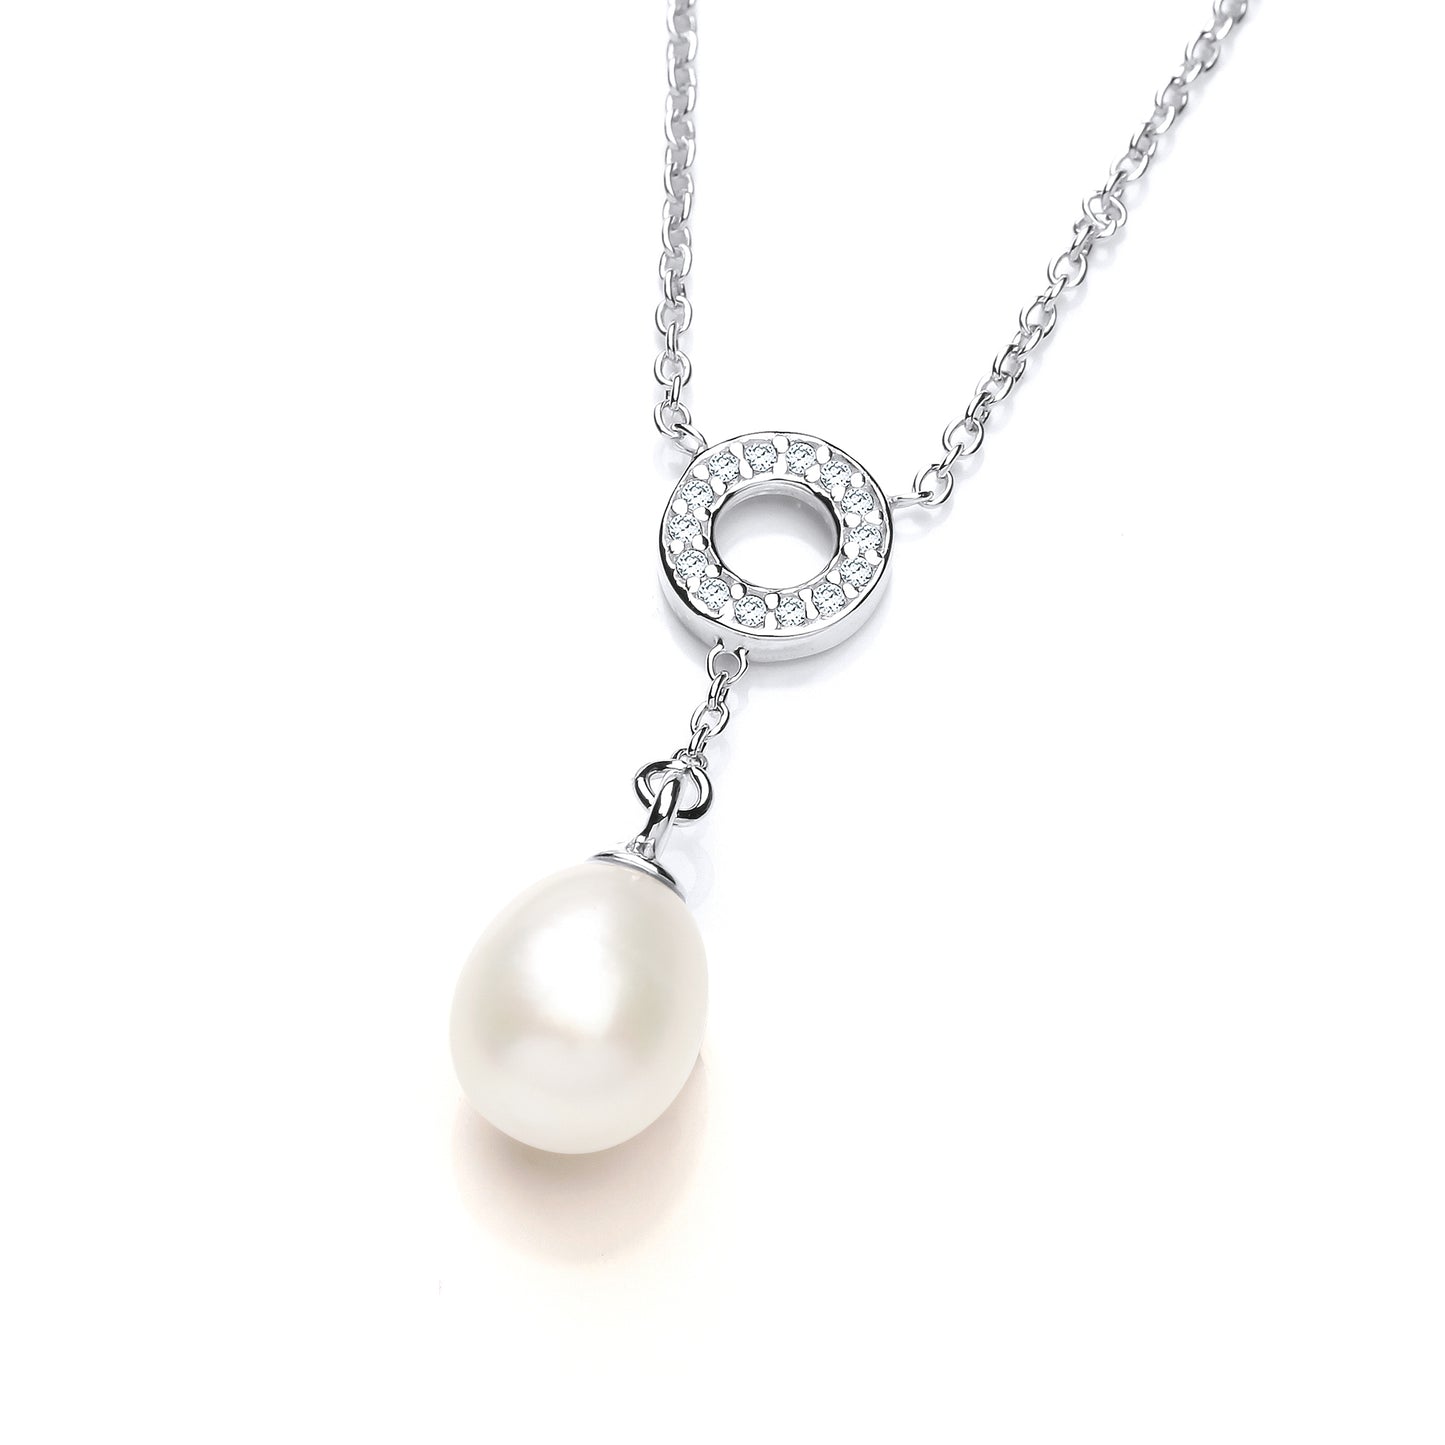 Silver  CZ Pearl Halo Chain Charm Necklace 7x9mm - GVK334